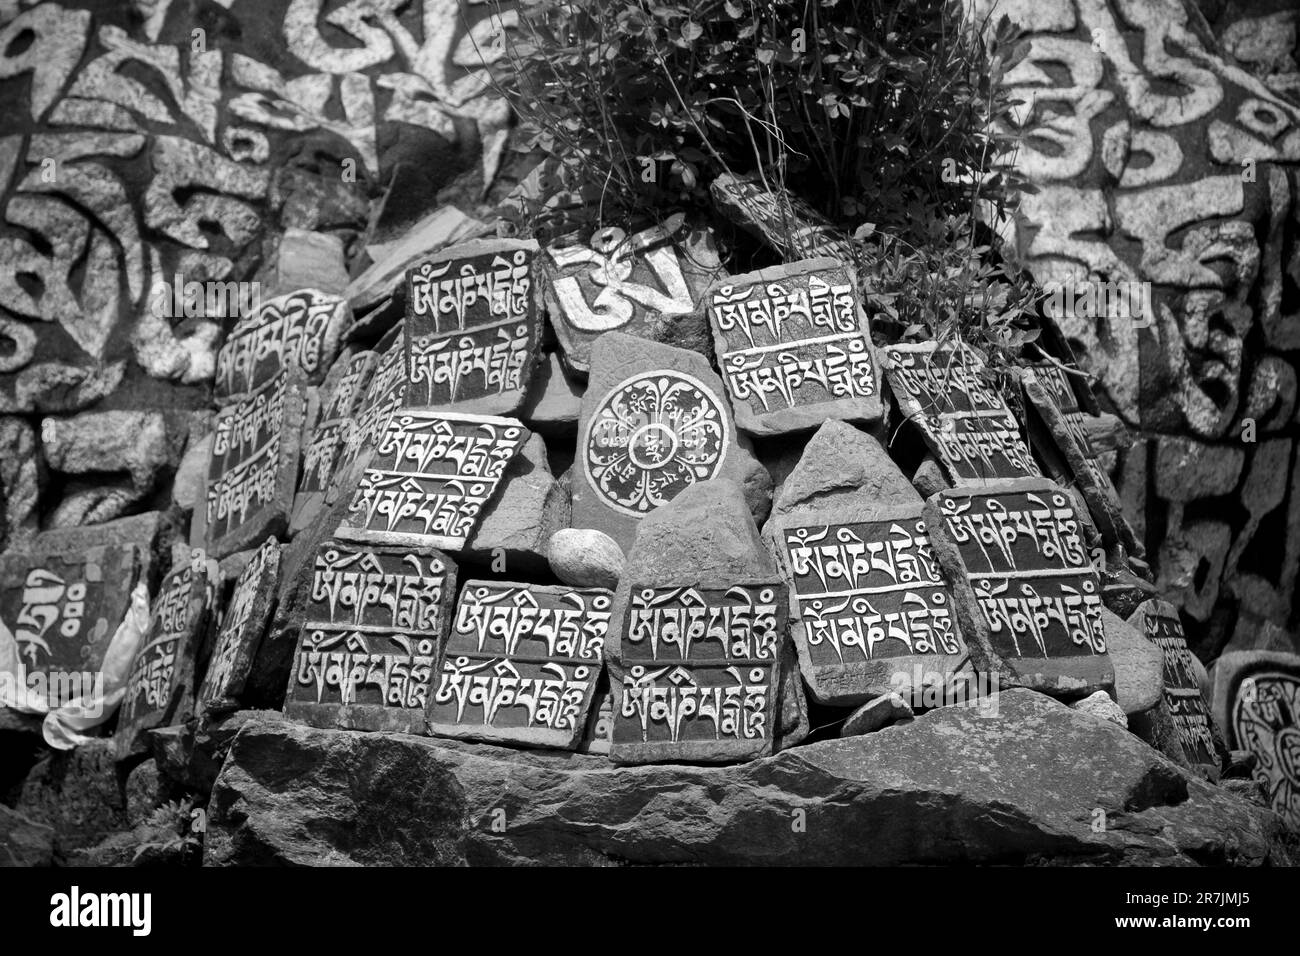 Mani stones etched with Buddhist prayers line the trails in Nepal's Khumbu region. Stock Photo